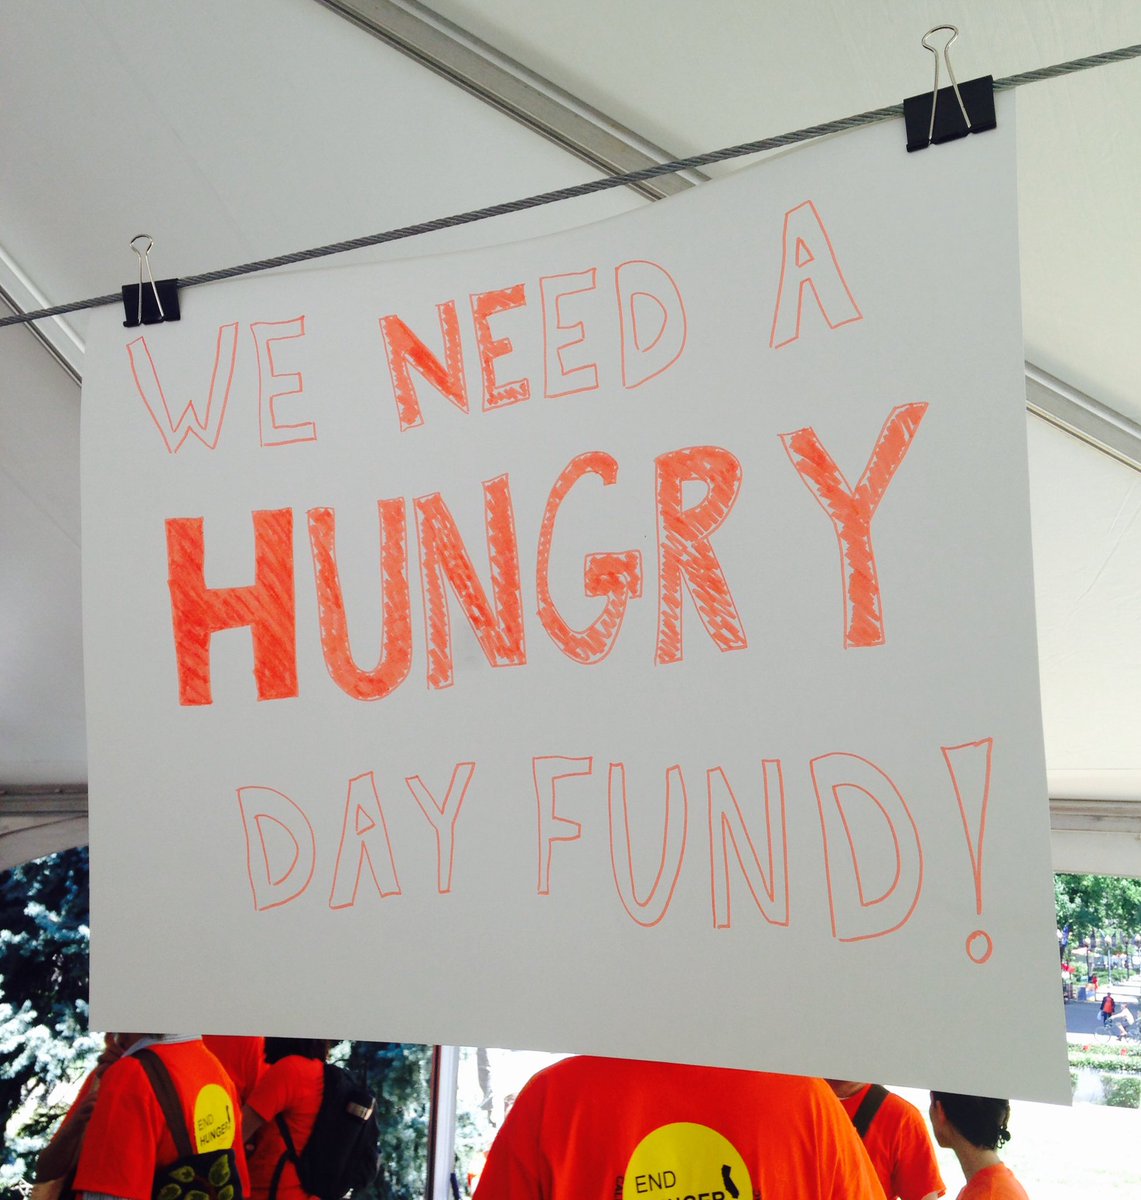 .@JerryBrownGov we need a 'hungry day fund' - not just a Rainy Day Fund! #HungerActionDay